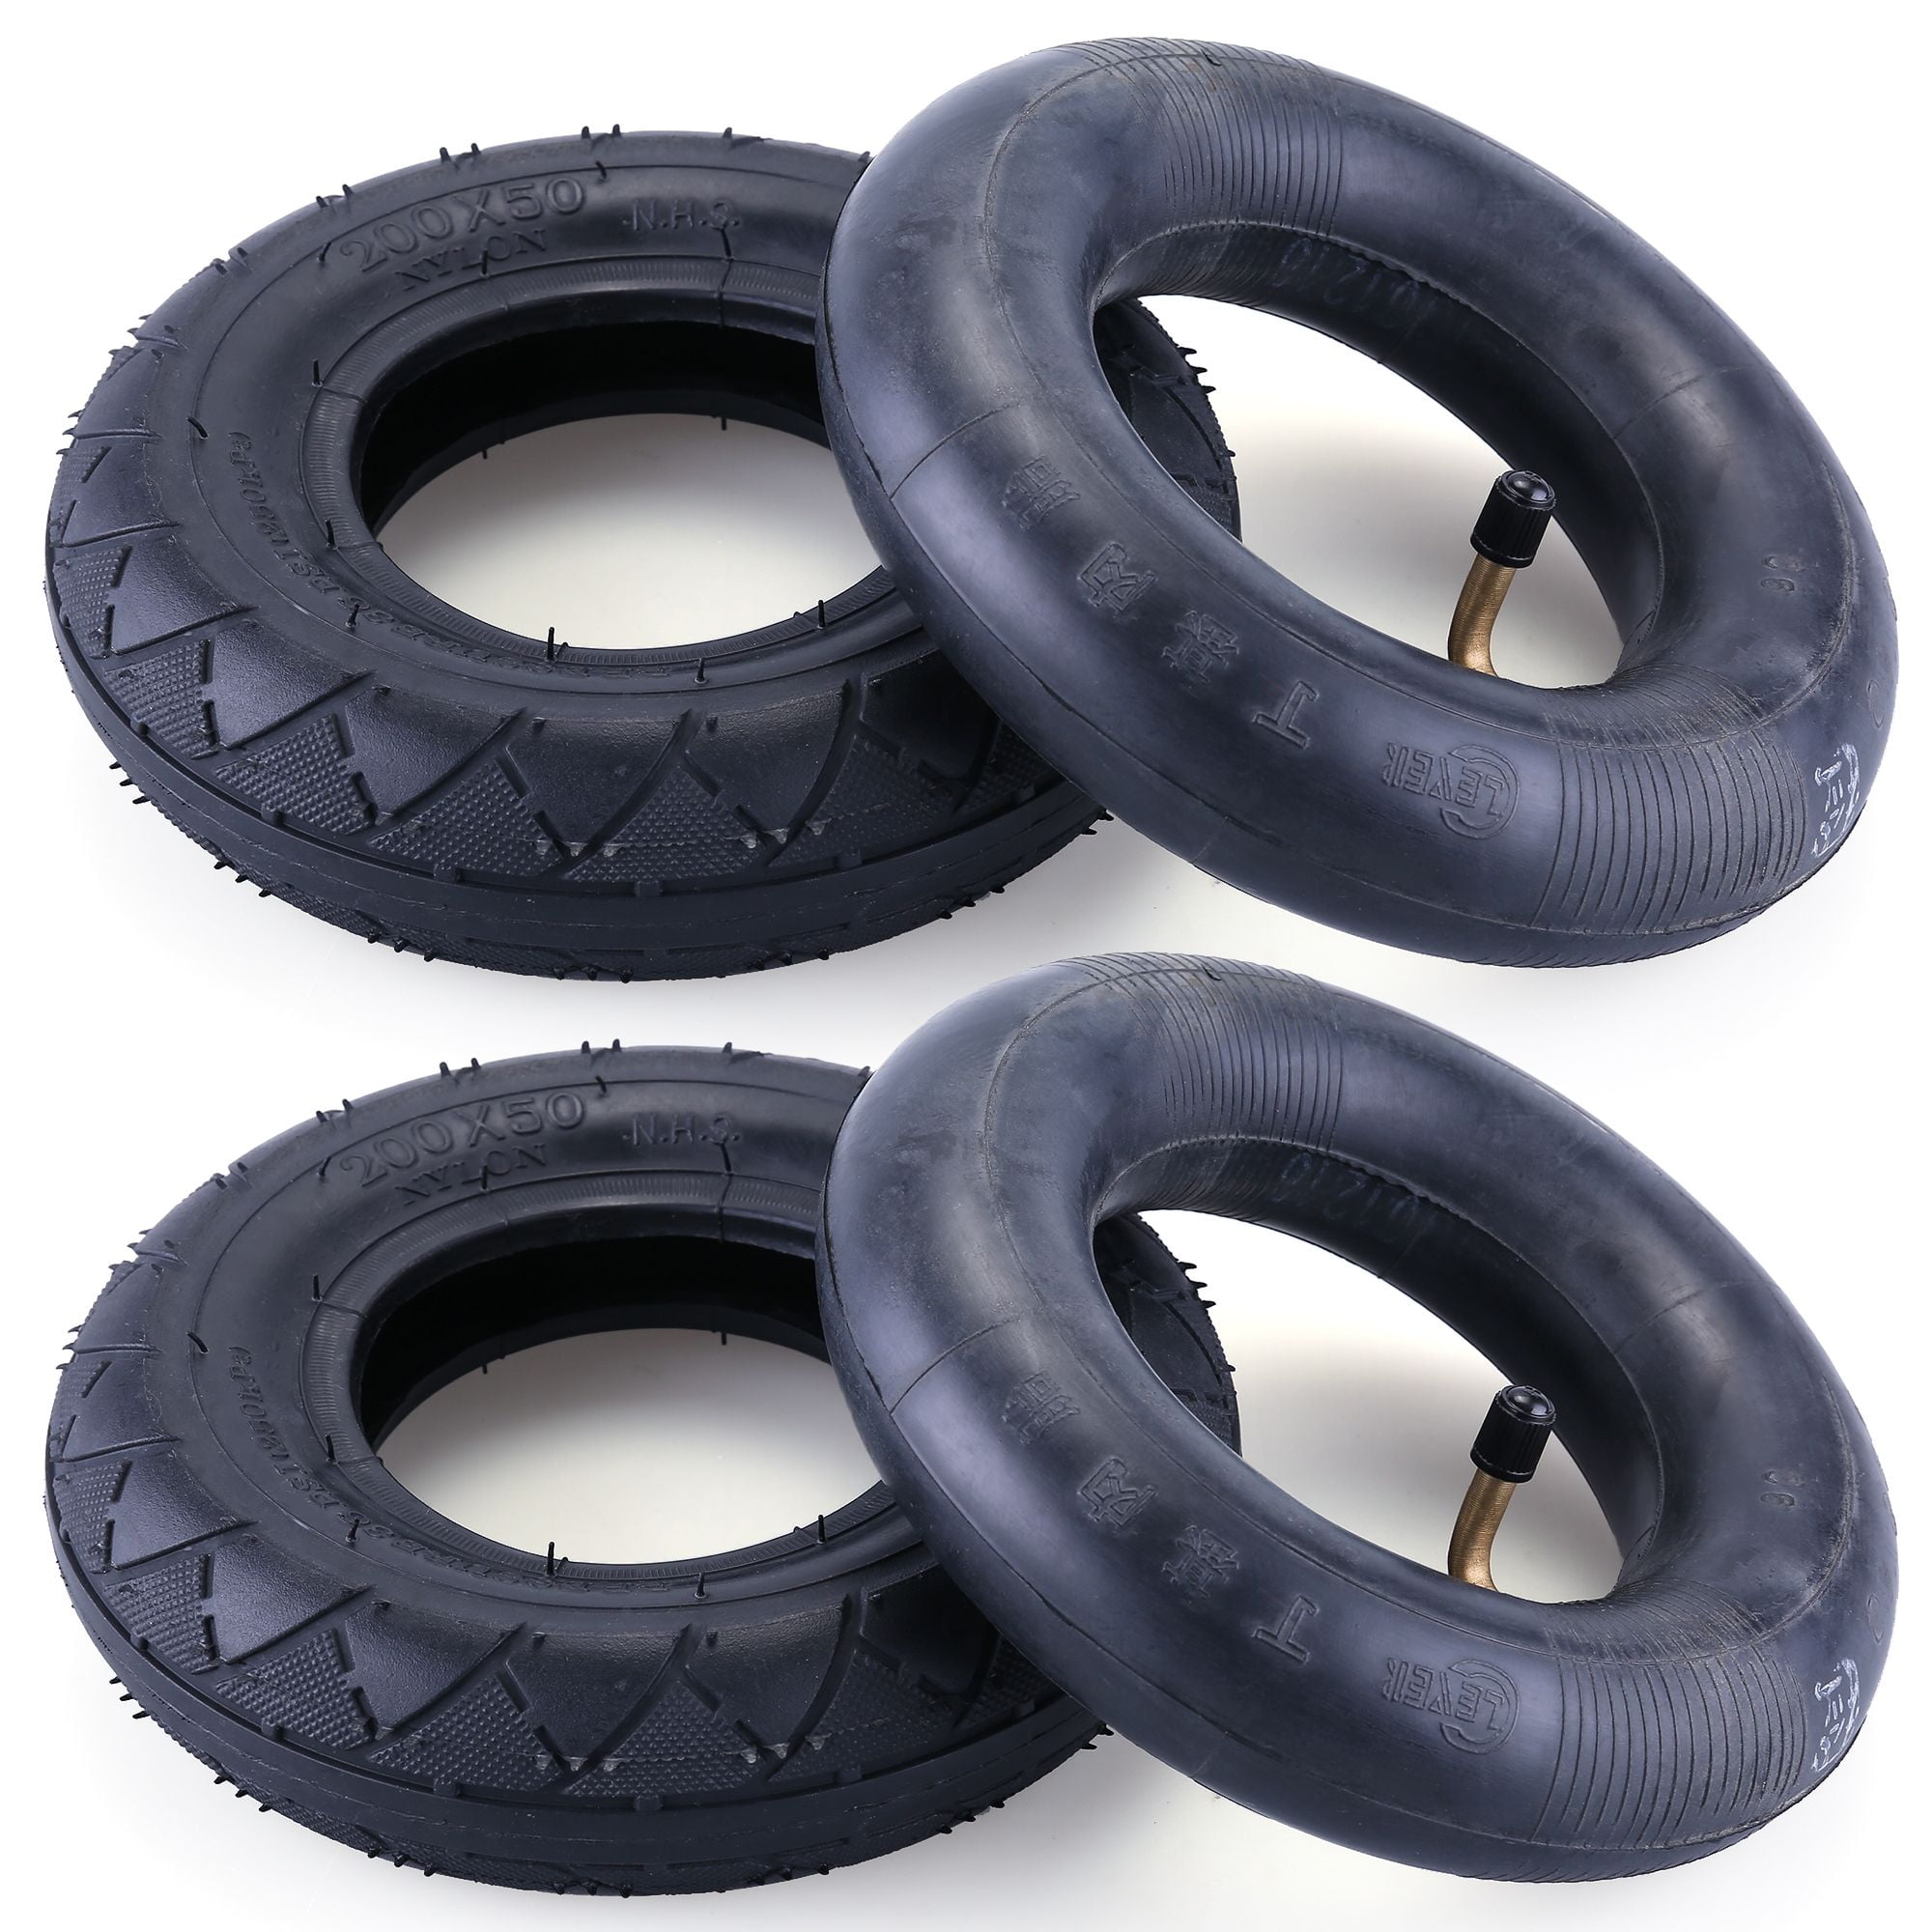 200 x 50 8"x2" Scooter Tire Line Tread style USA Seller 